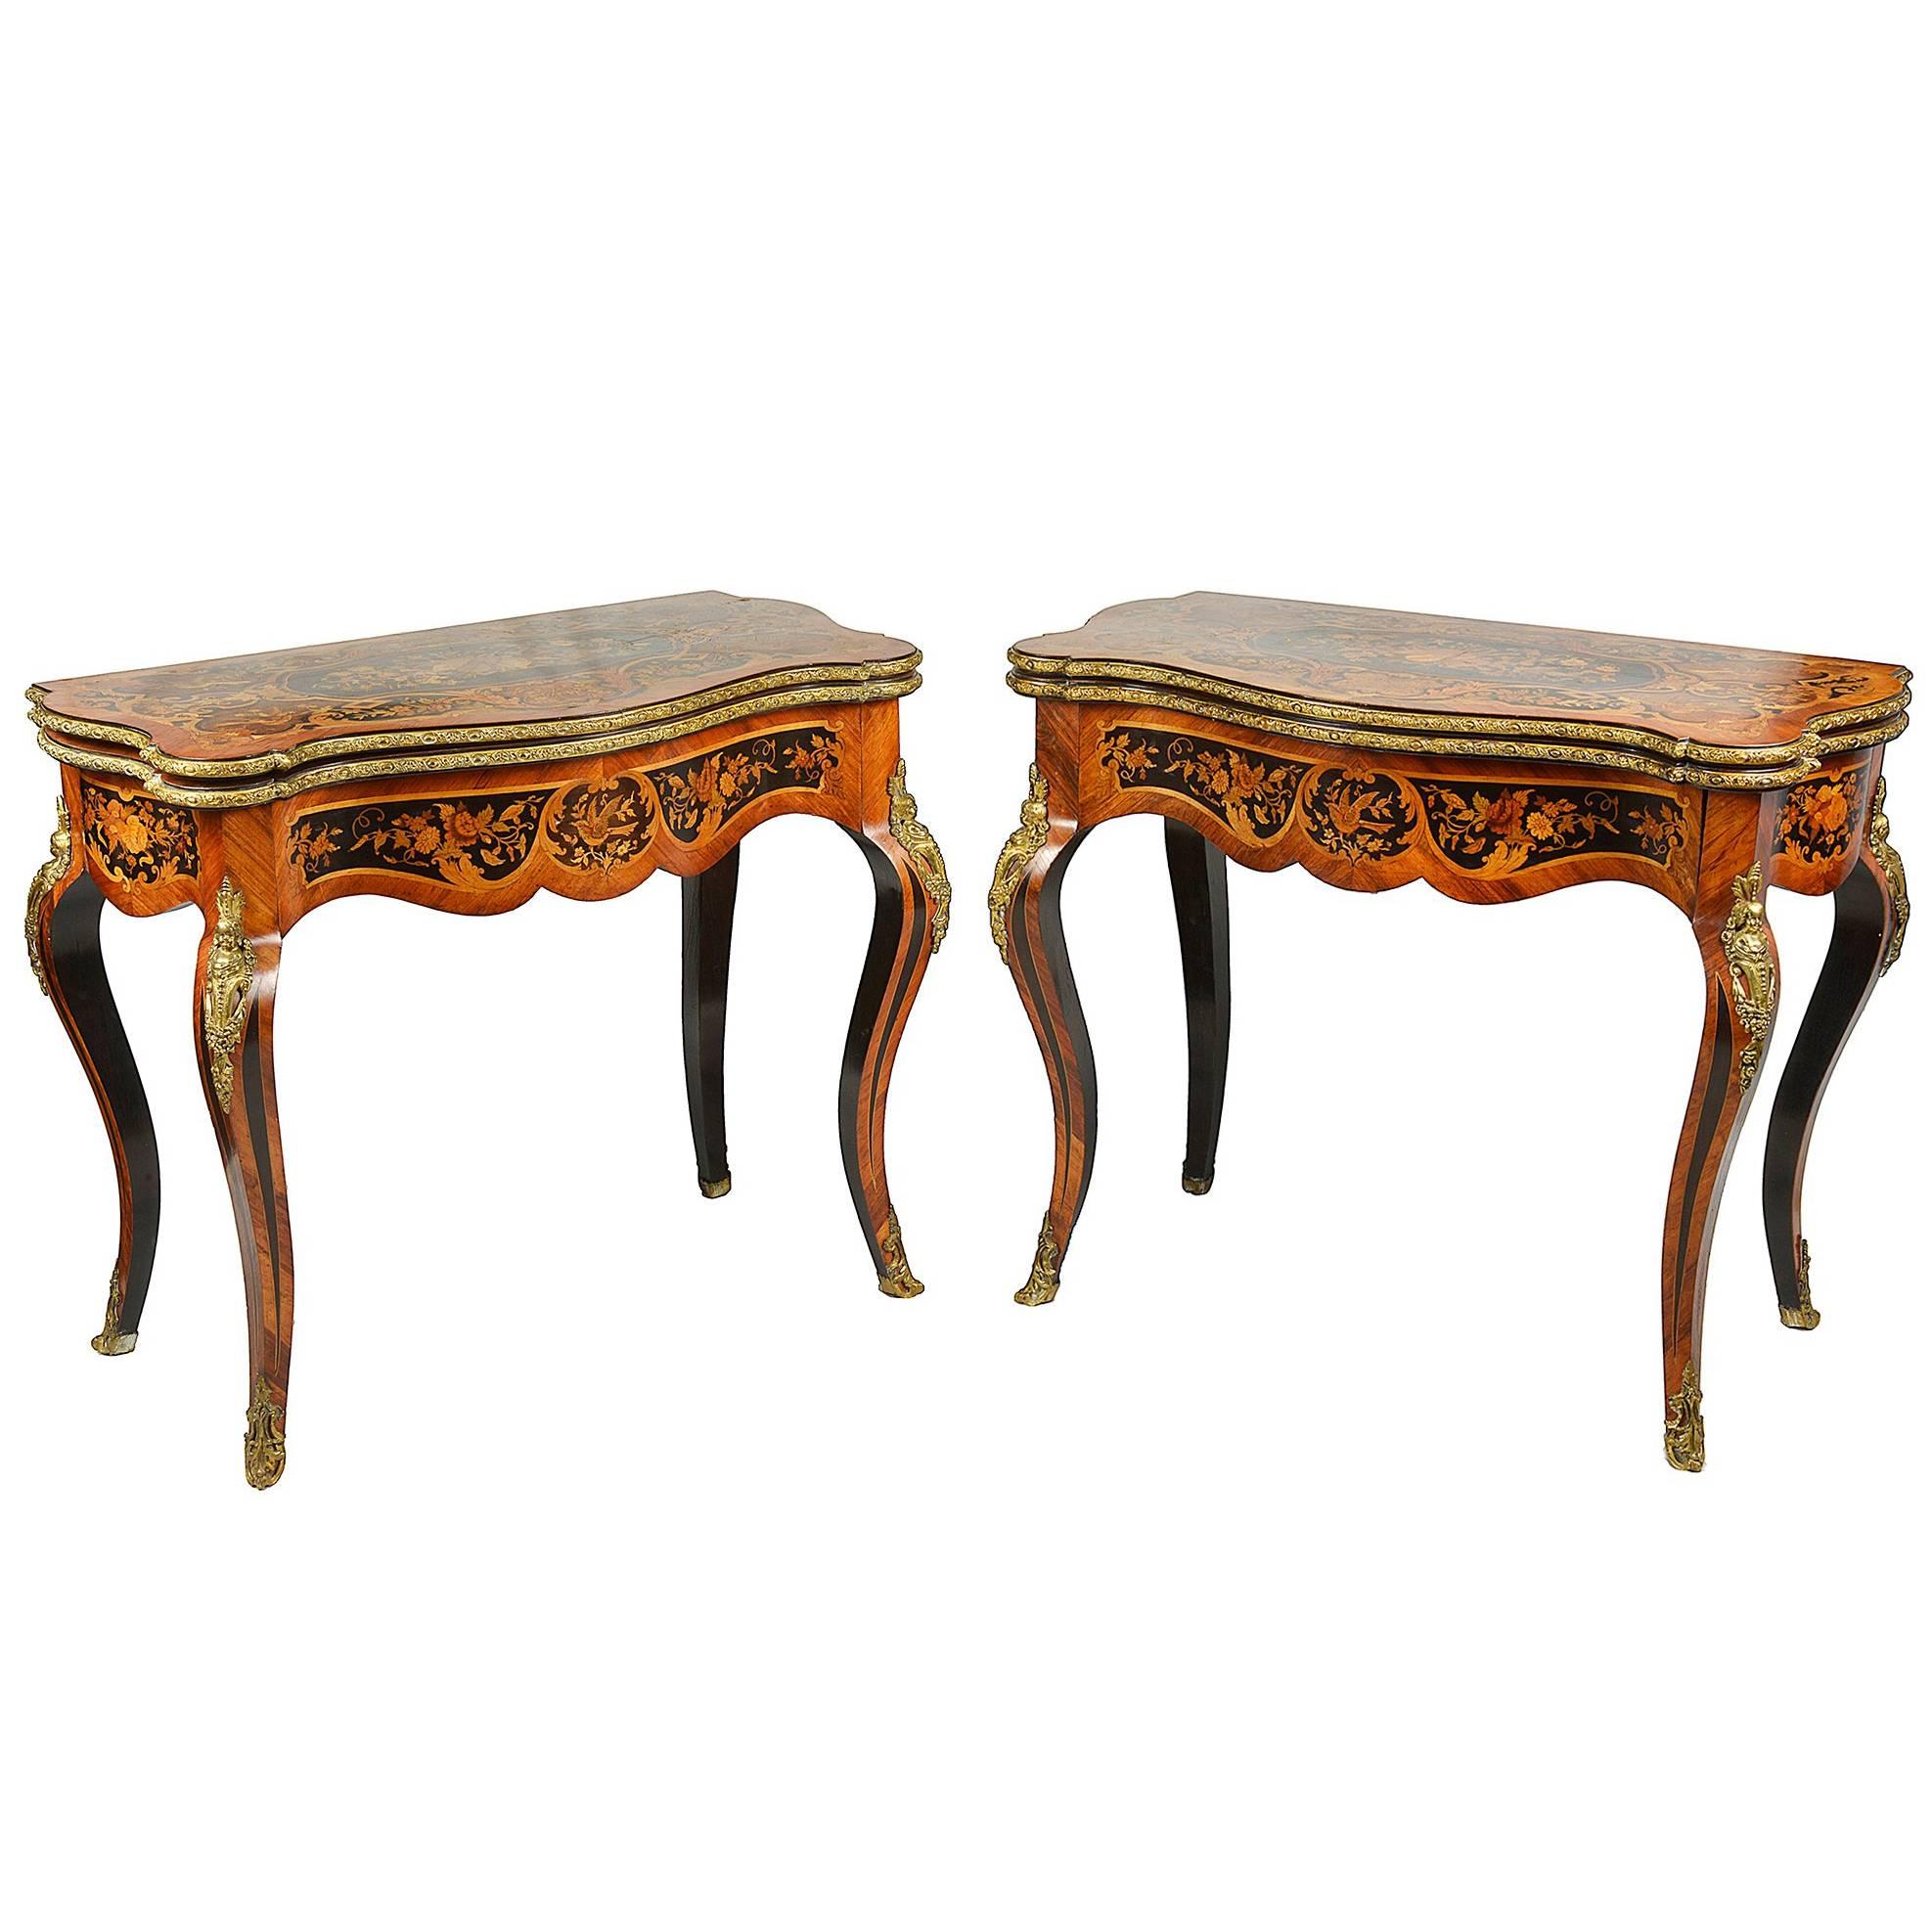 Pair of Louis XVI Style Marquetry Card Tables, 19th Century